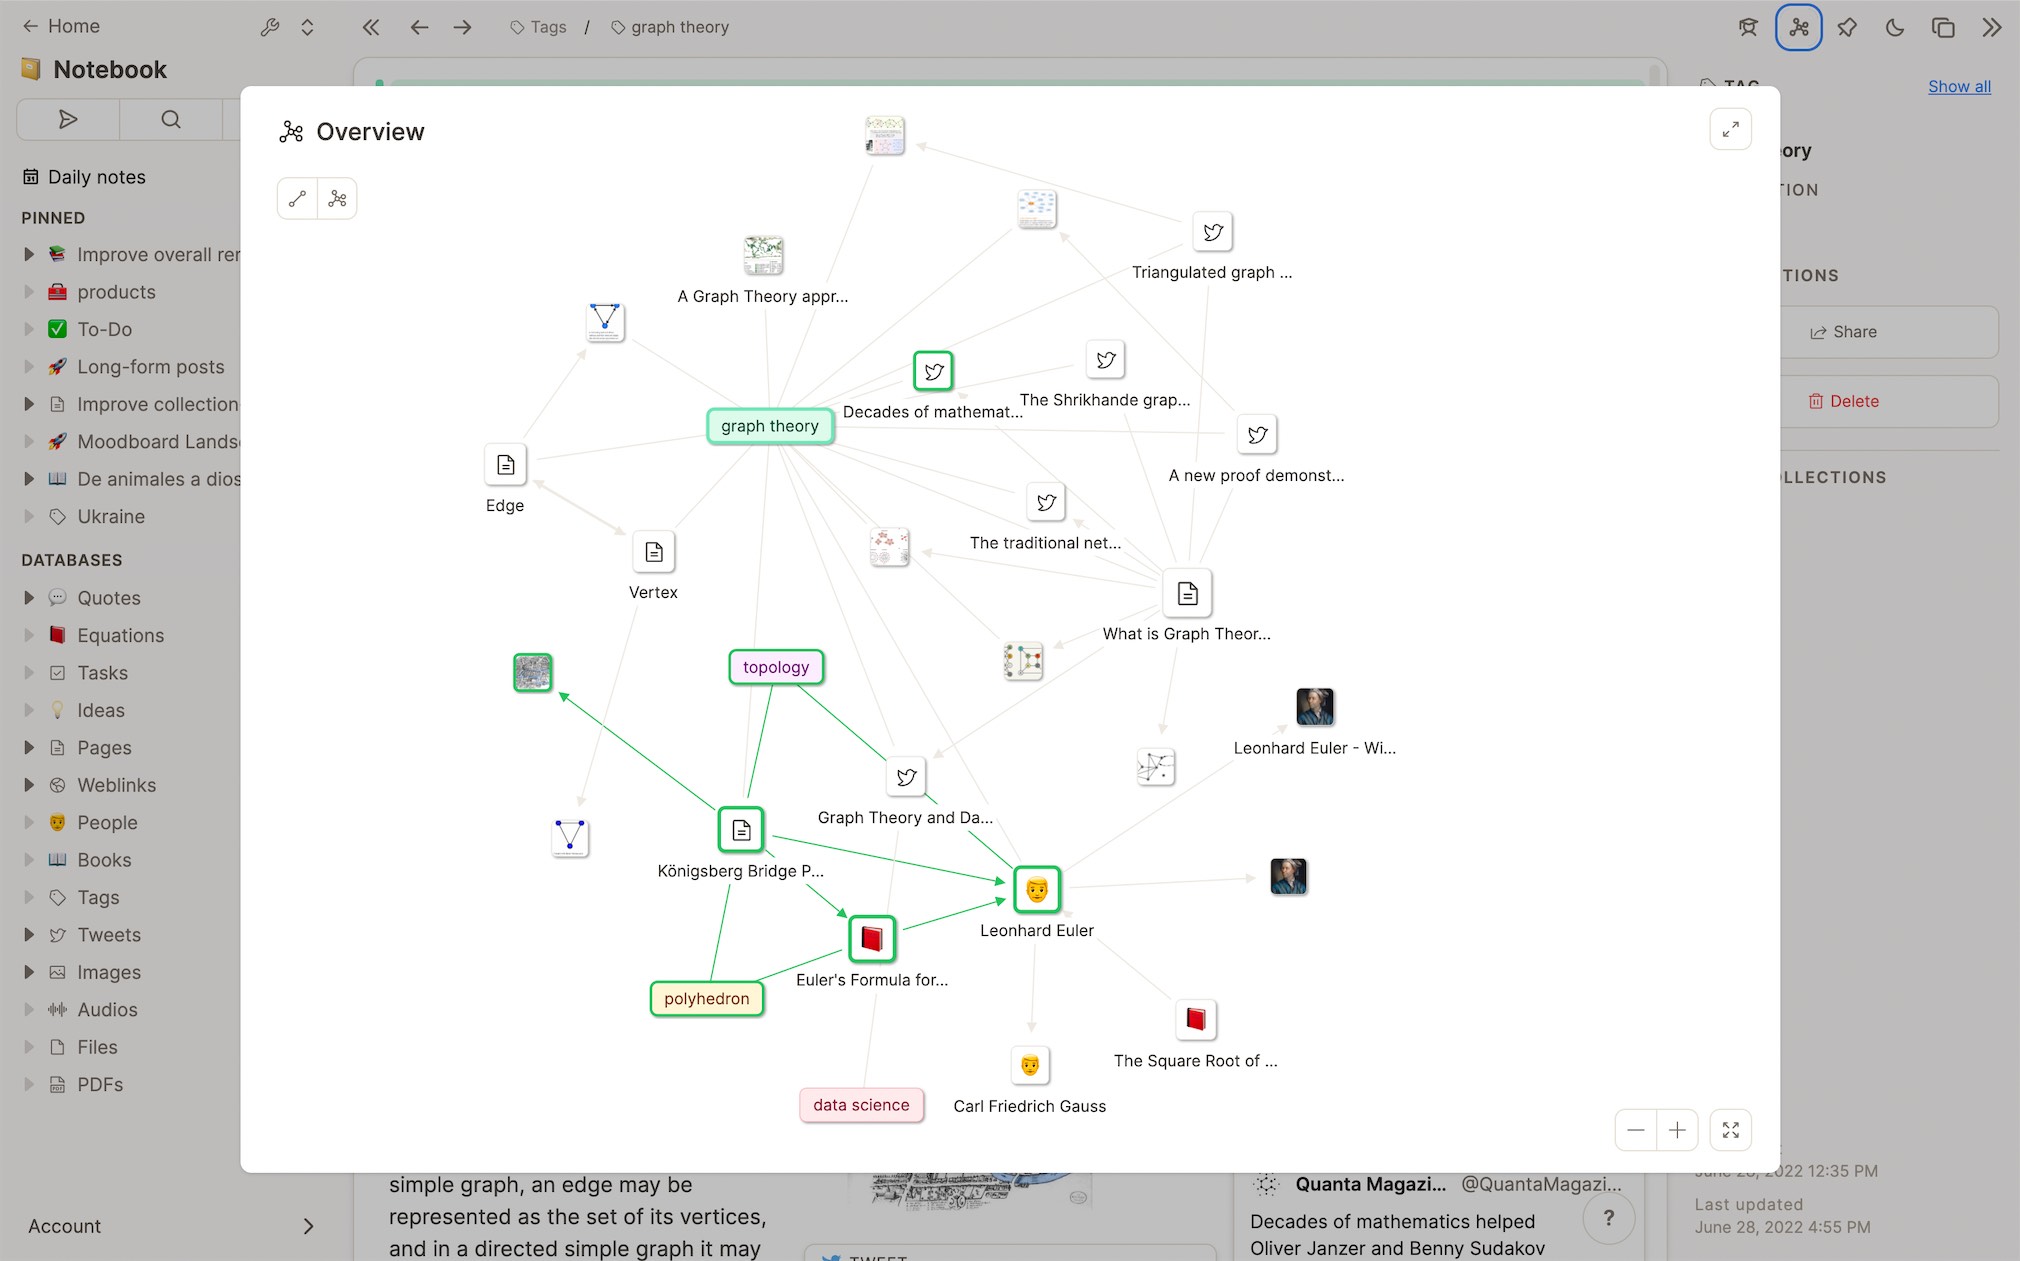 Visualization of public content in knowledge graph